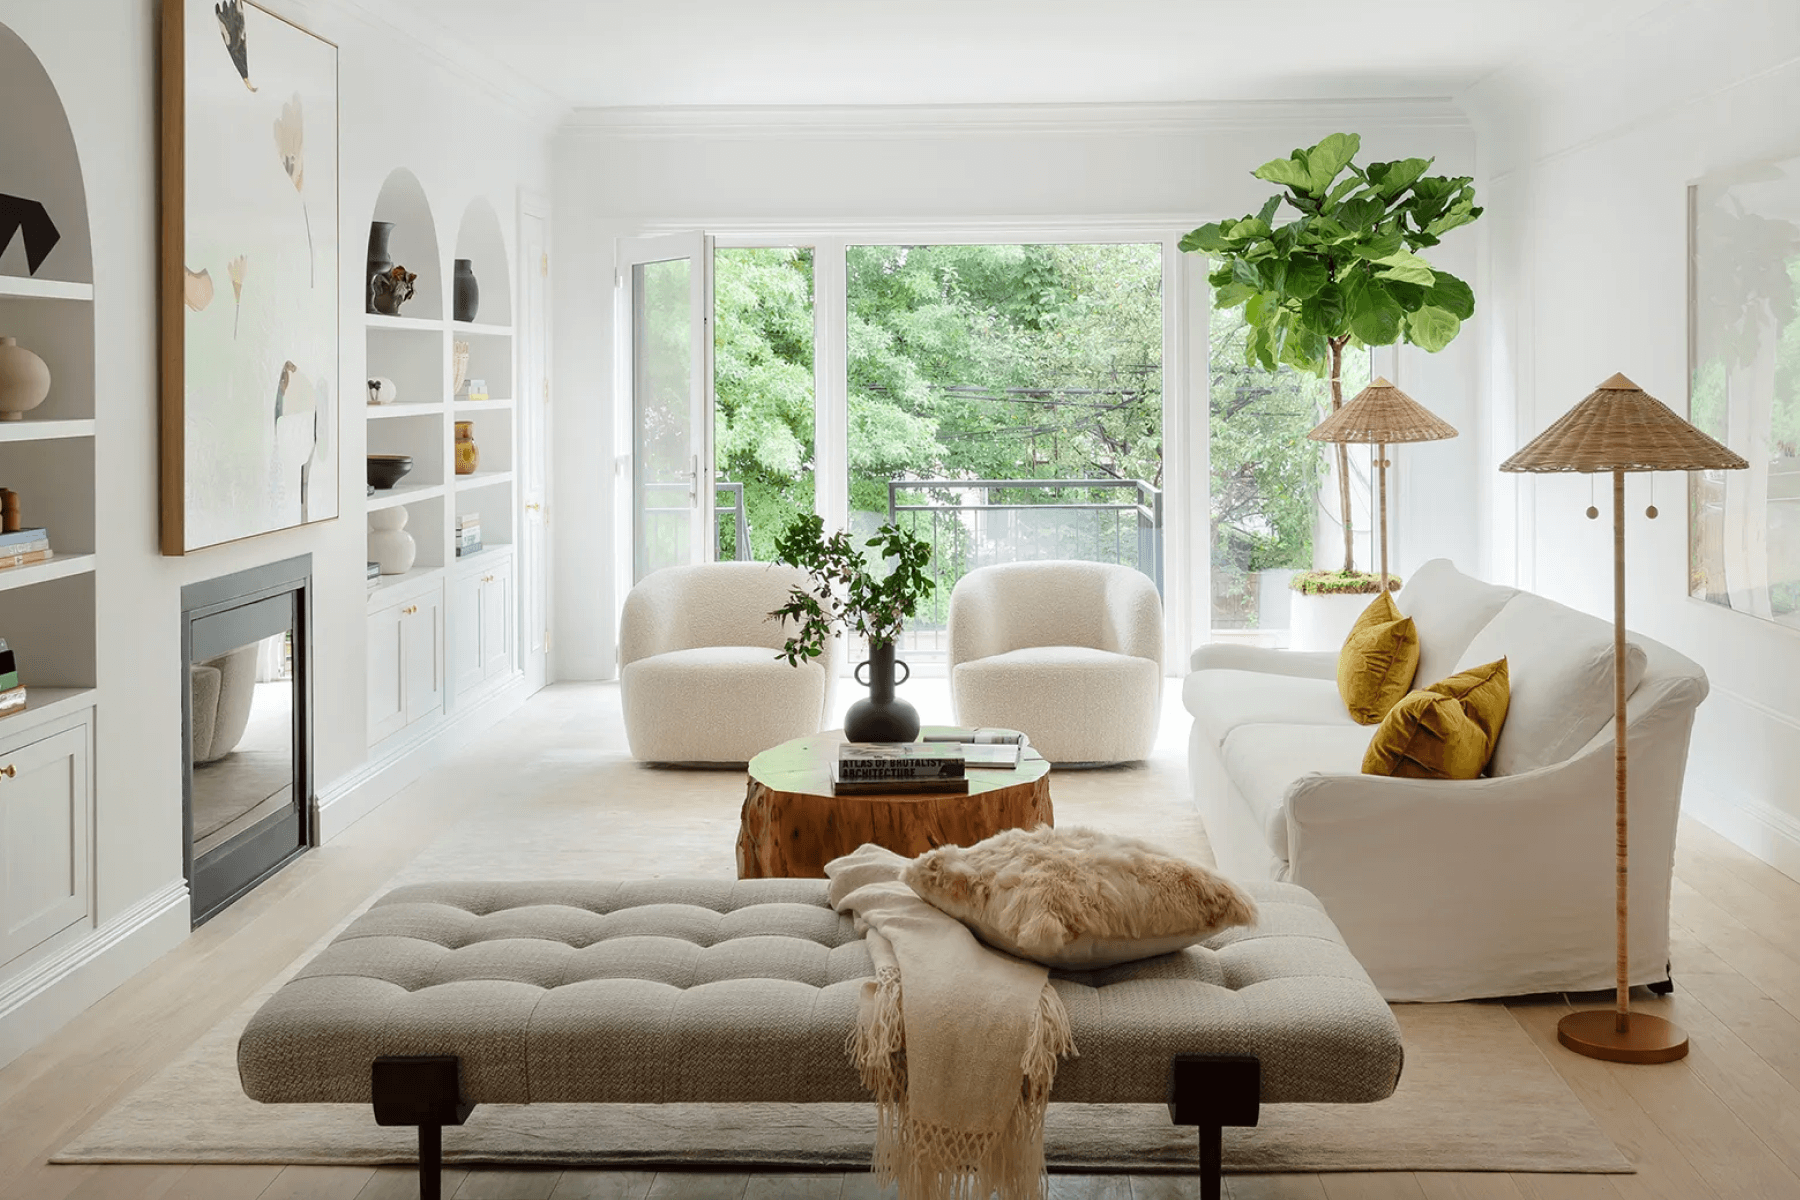 An airy living room with a tufted chaise lounge, two white modern arm chairs, a white couch, two rattan floor lamps, a fiddle leaf fig, and a fireplace with built-in arched shelves.